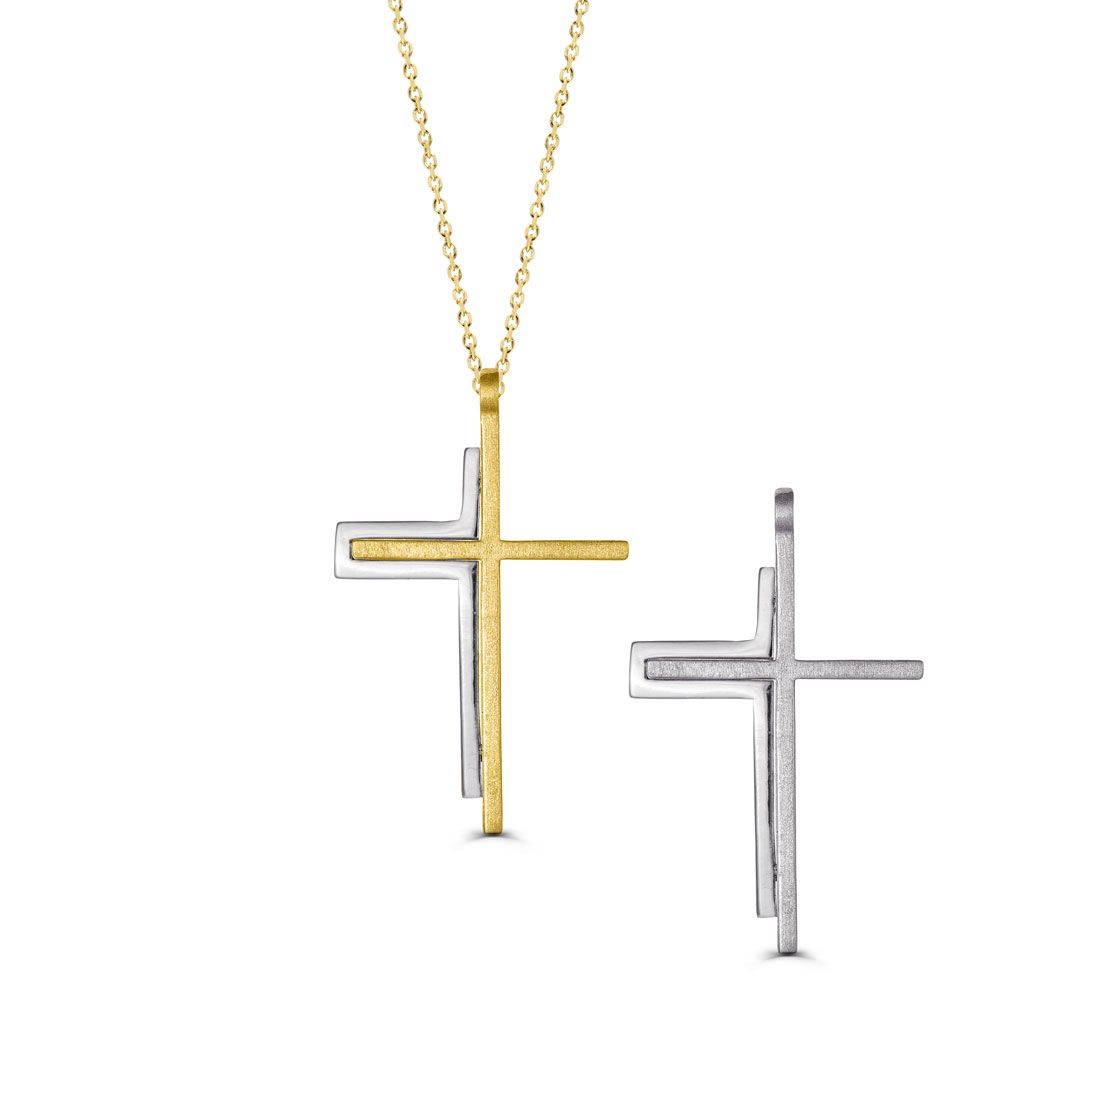 Handmade cross with double elegant lines, on a delicate gold chain. DIMENSIONS: 3cm x 2cm